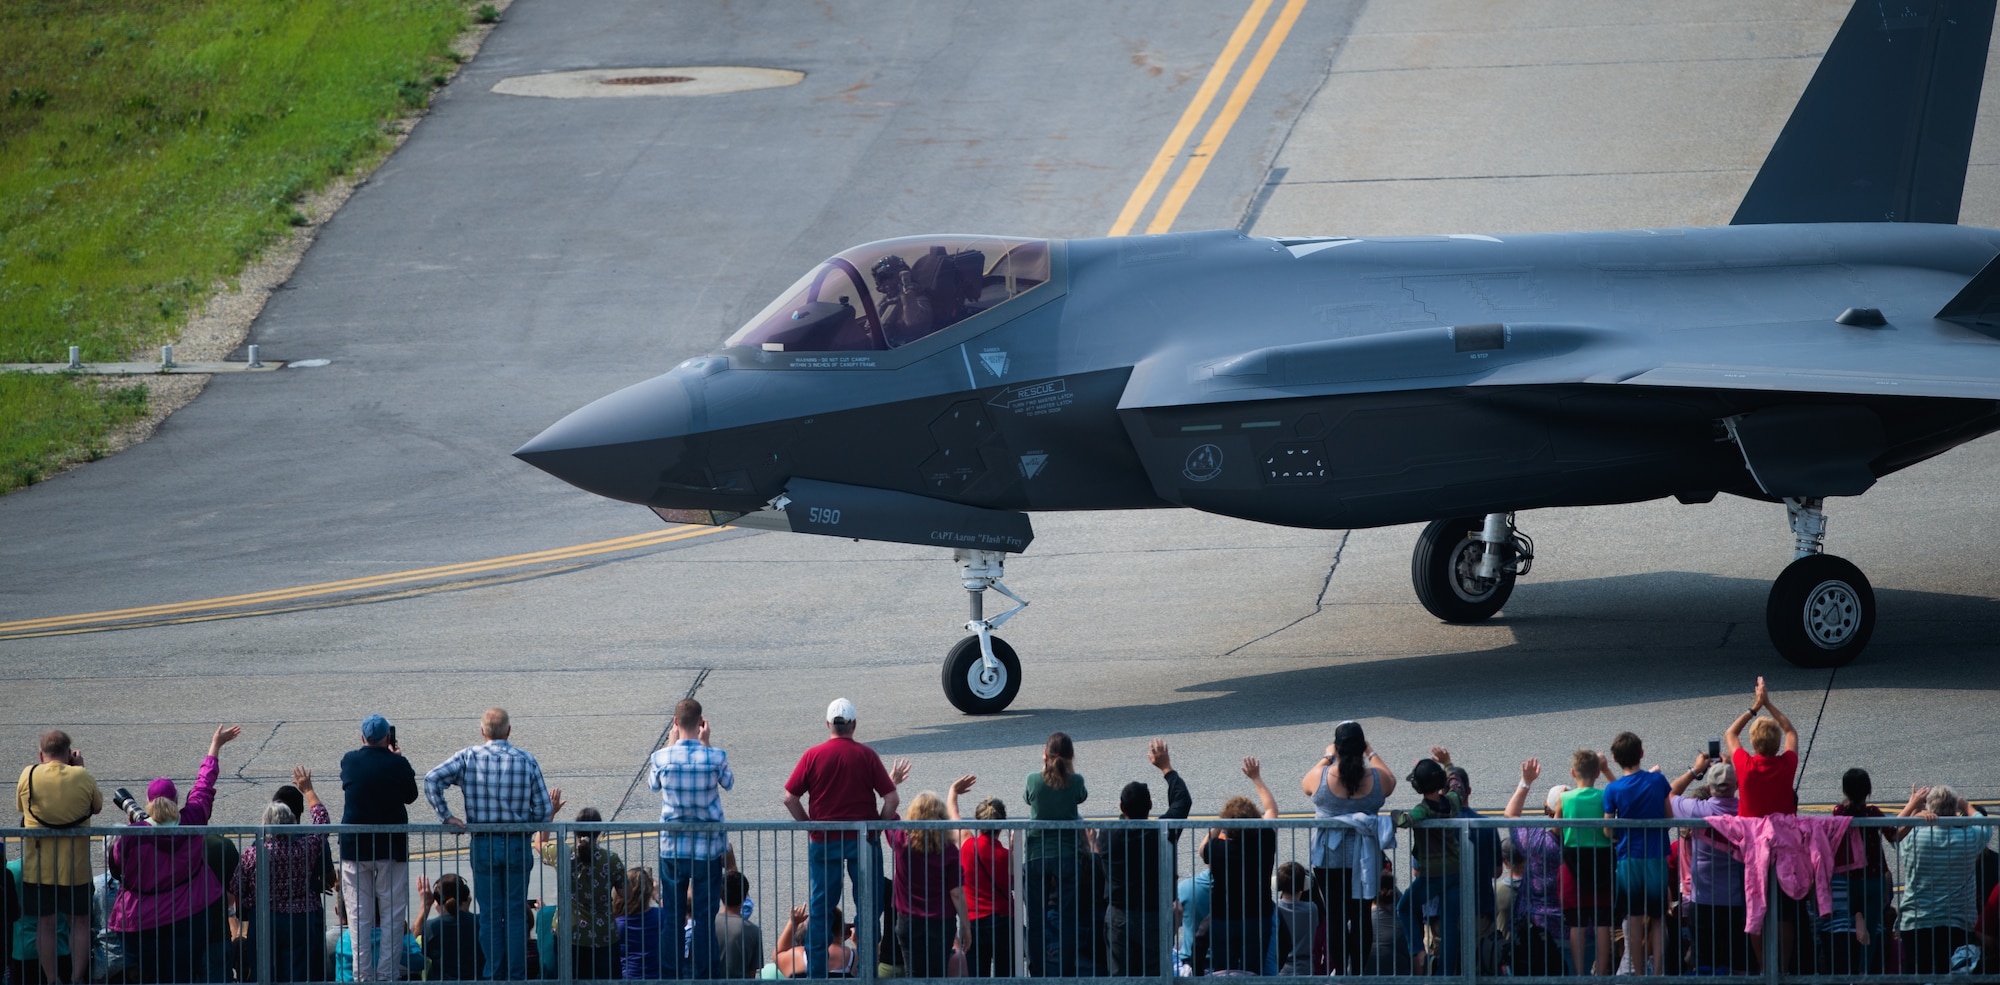 Airshow spectators wave as Capt. Andrew “Dojo”Olson, F-35 Demonstration Team pilot and commander returns from performing an aerial demonstration during the Arctic Lightning Airshow July 13, 2019, at Eielson Air Force Base, Alaska. Spectators got an up-close look at the Air Force’s newest fighter jet marking the airshow since 2008. (U.S. Air Force photo by Senior Airman Alexander Cook)